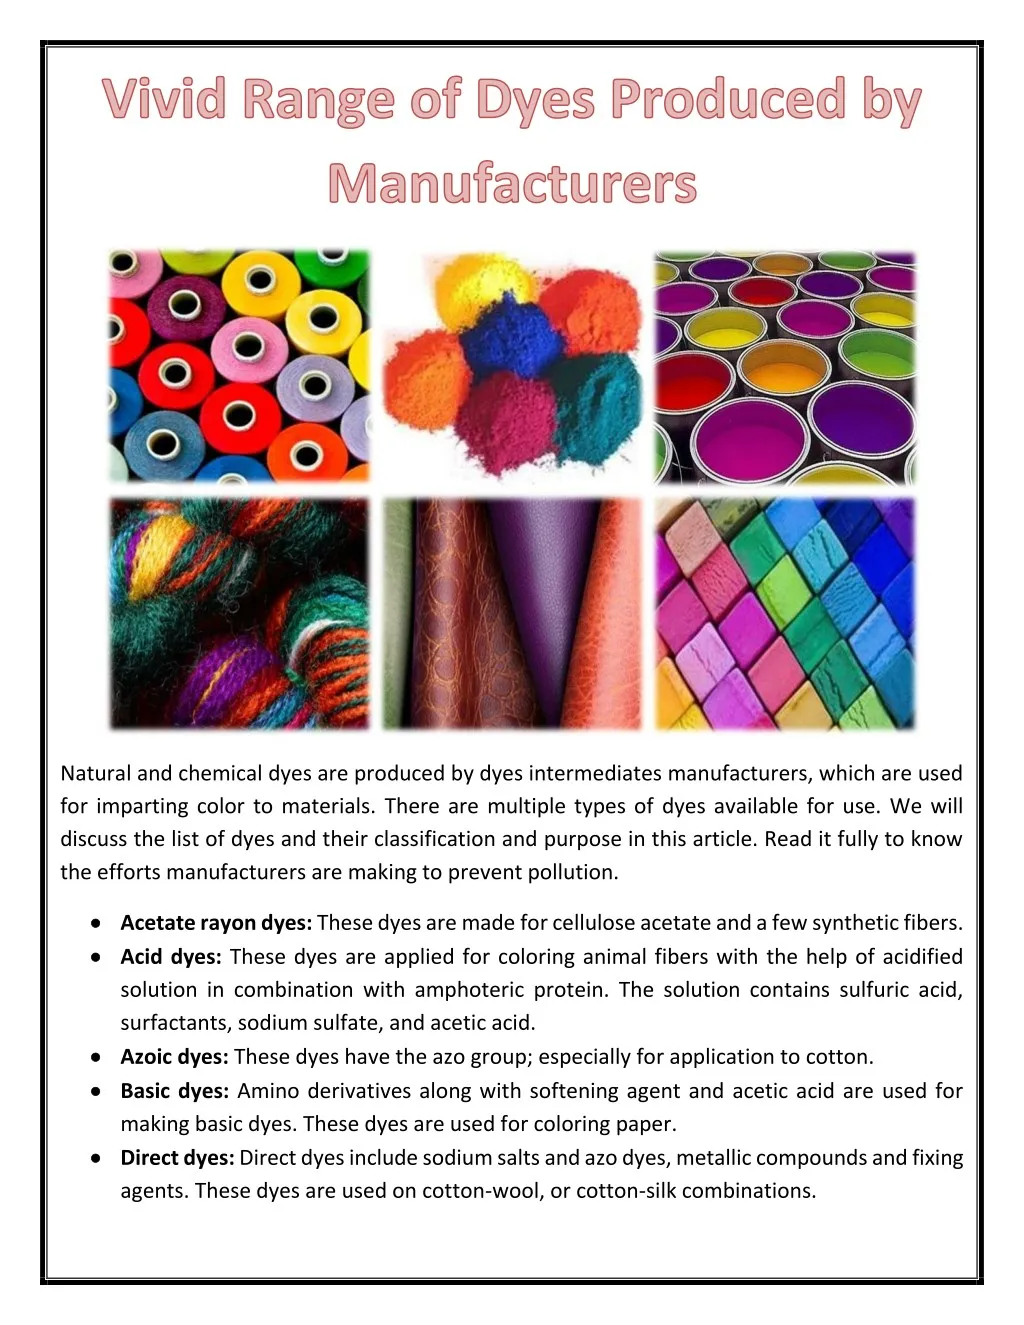 natural and chemical dyes are produced by dyes